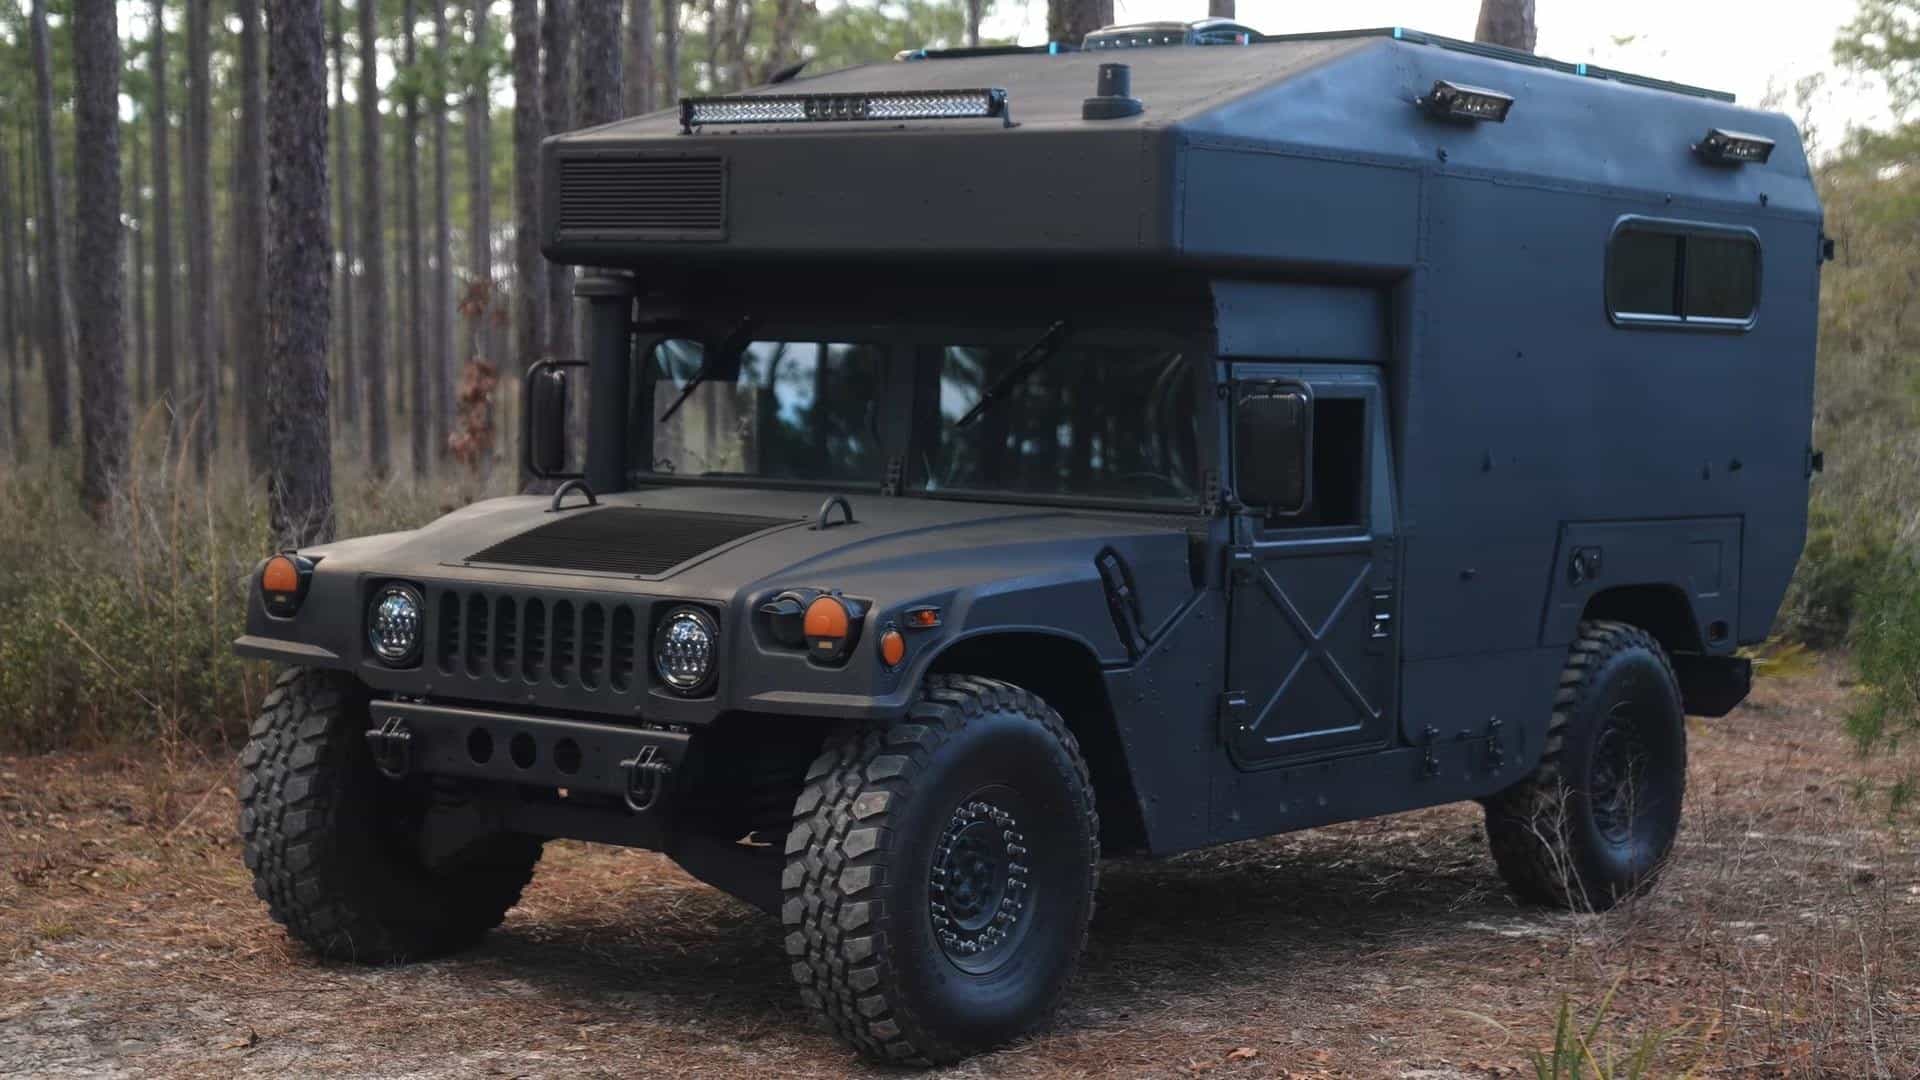 mean looking humvee hides a deluxe and modern tiny home interior it even has a bathroom 229600 1